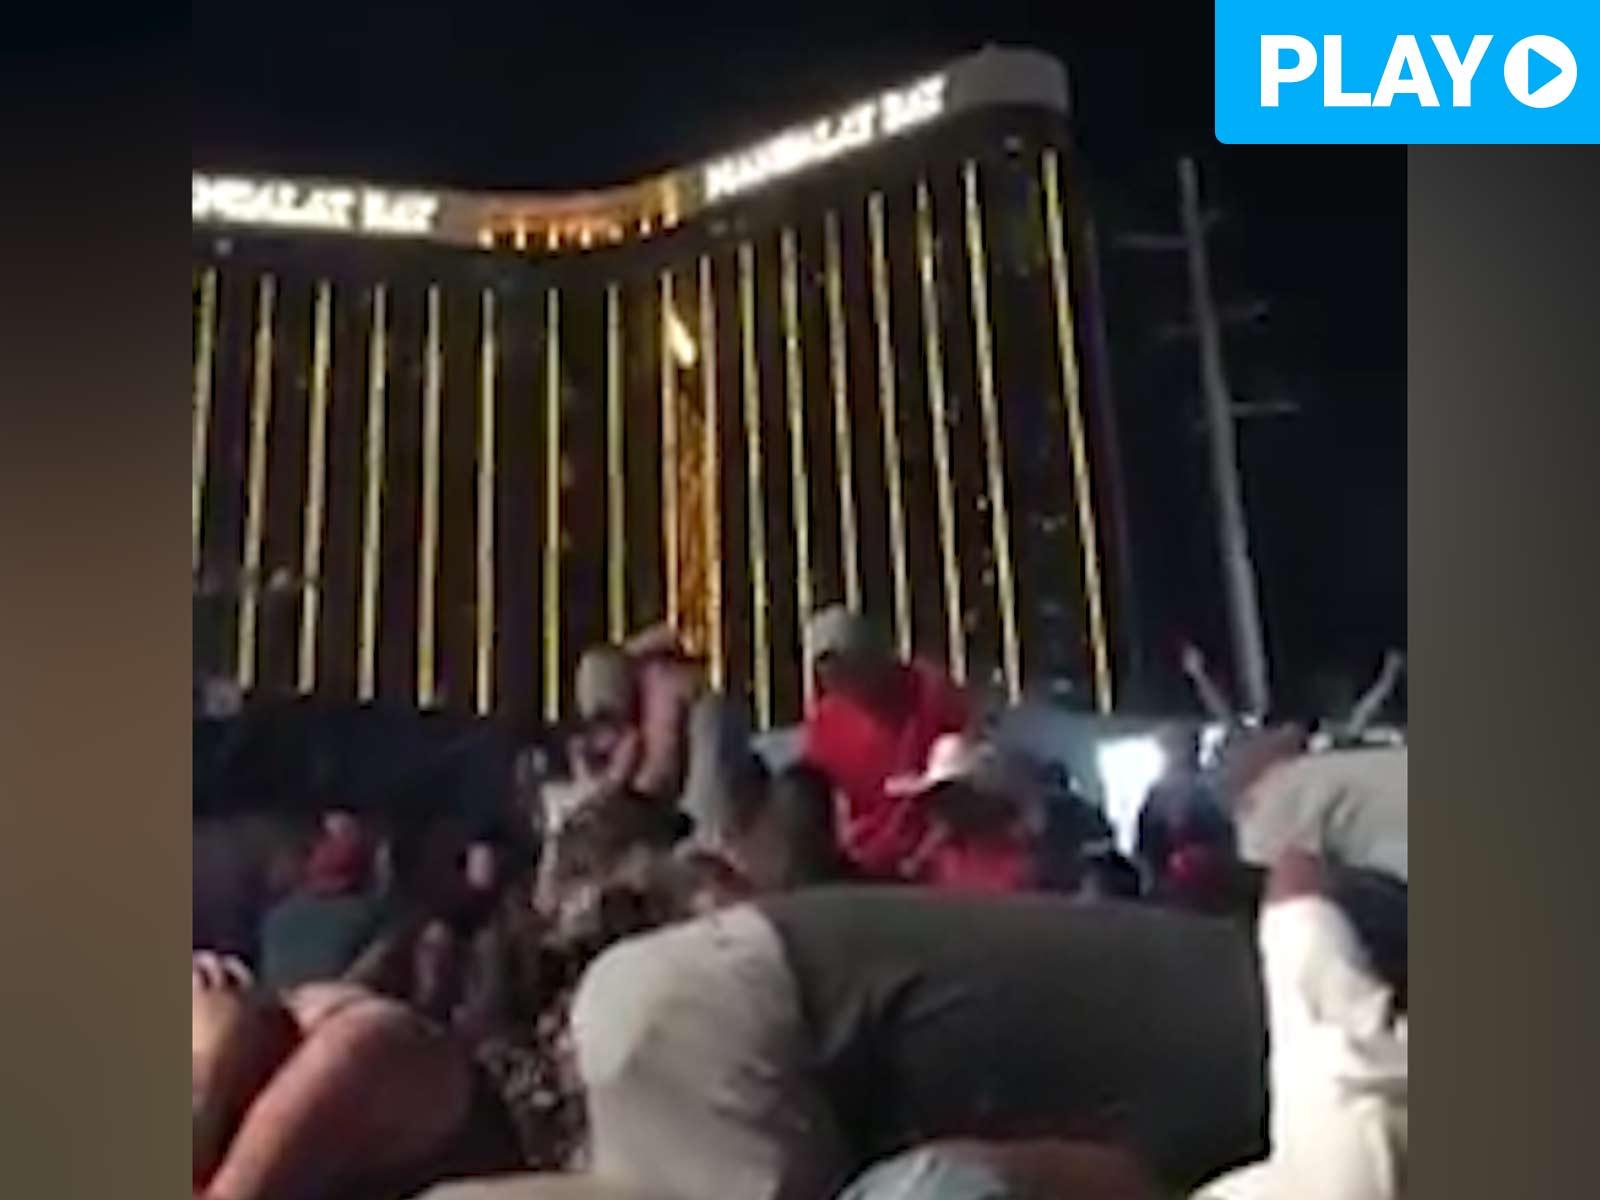 Las Vegas Mass Shooting Emergency Audio: ‘We Need to Stop the Shooter!’